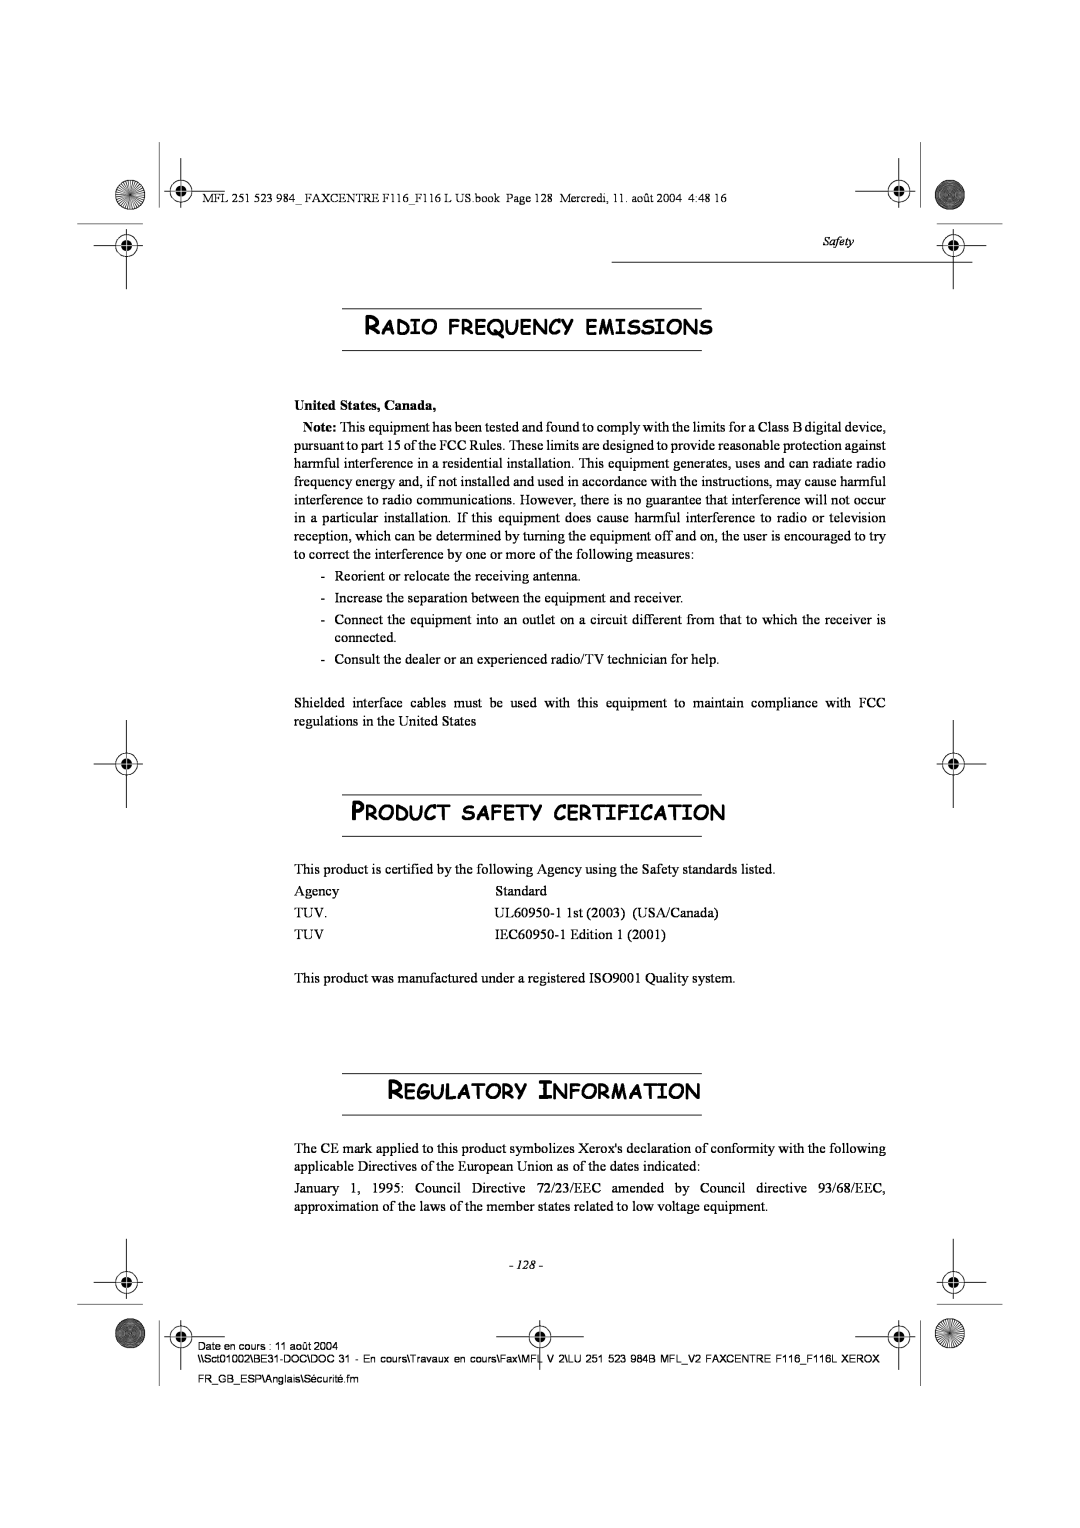 Xerox F116 Radio Frequency Emissions, Product Safety Certification, Regulatory Information, United States, Canada 